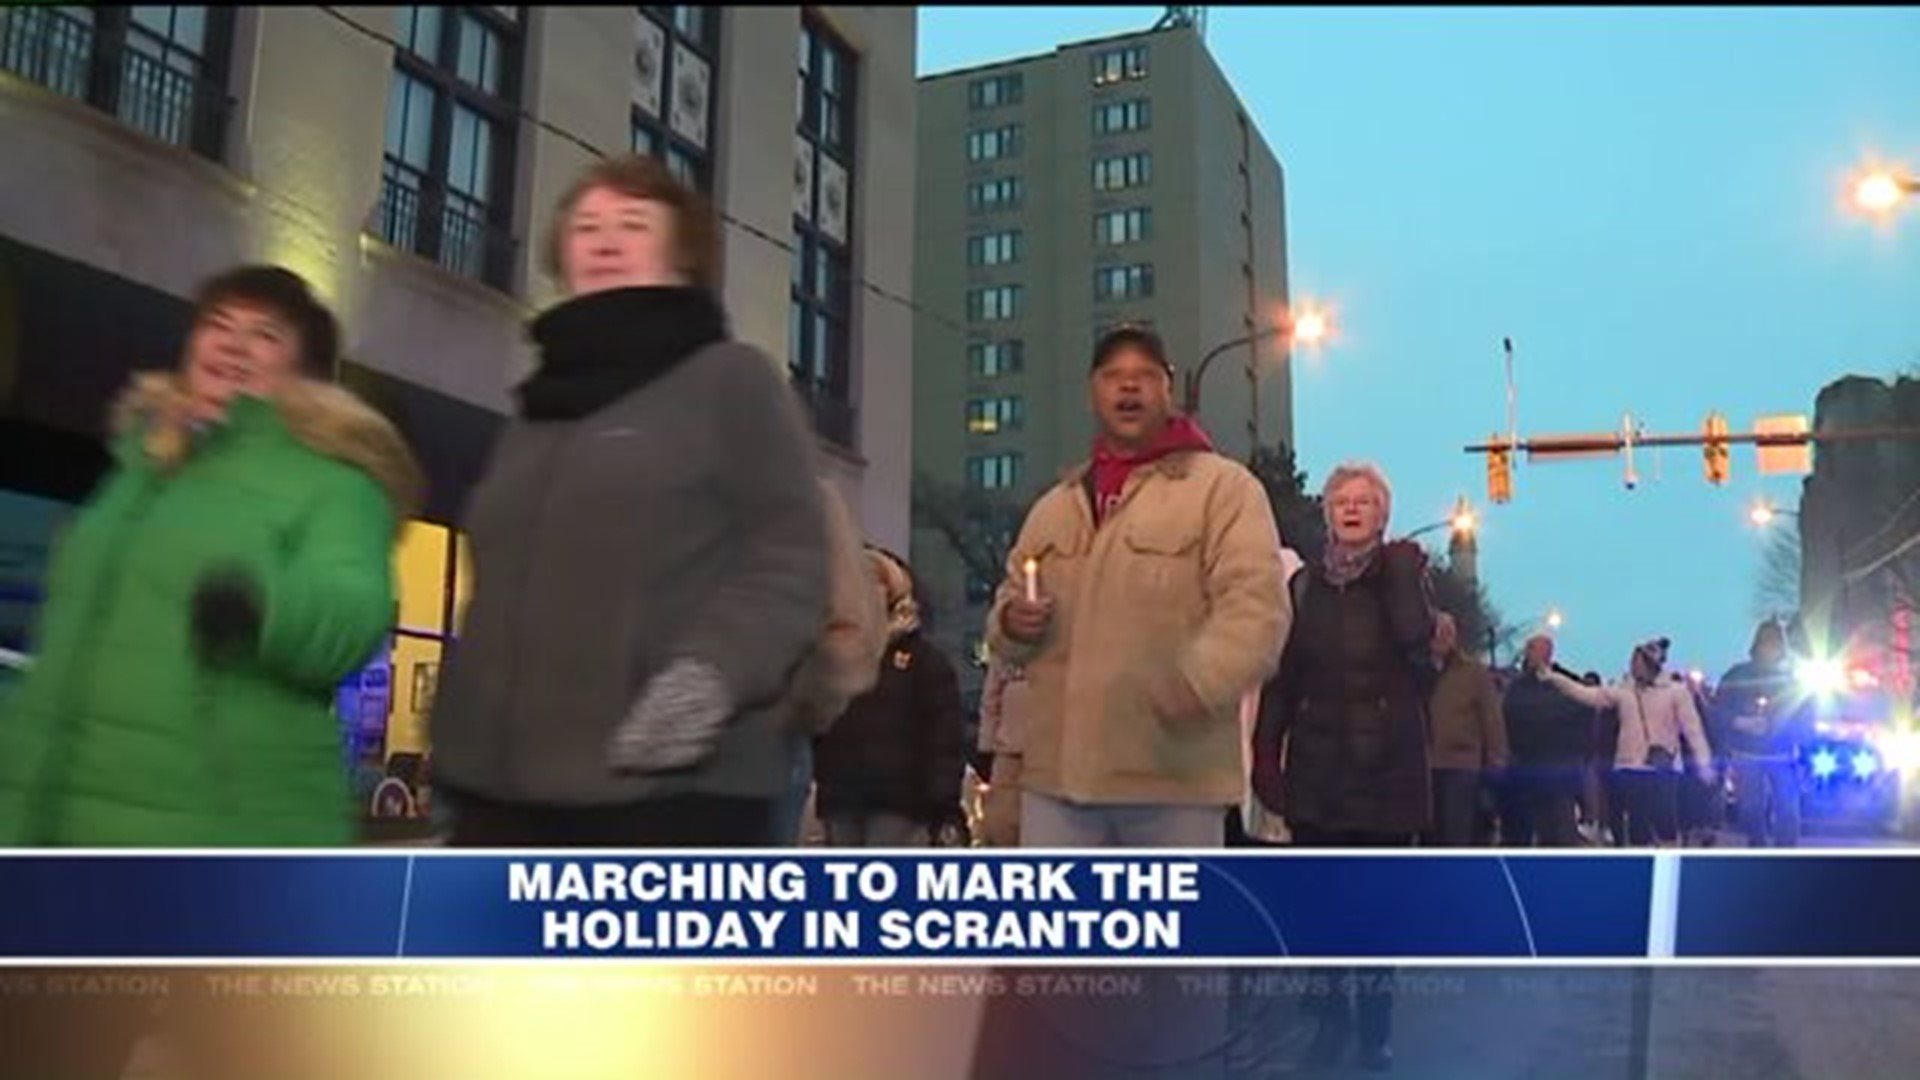 Marching to Mark the Holiday in Scranton